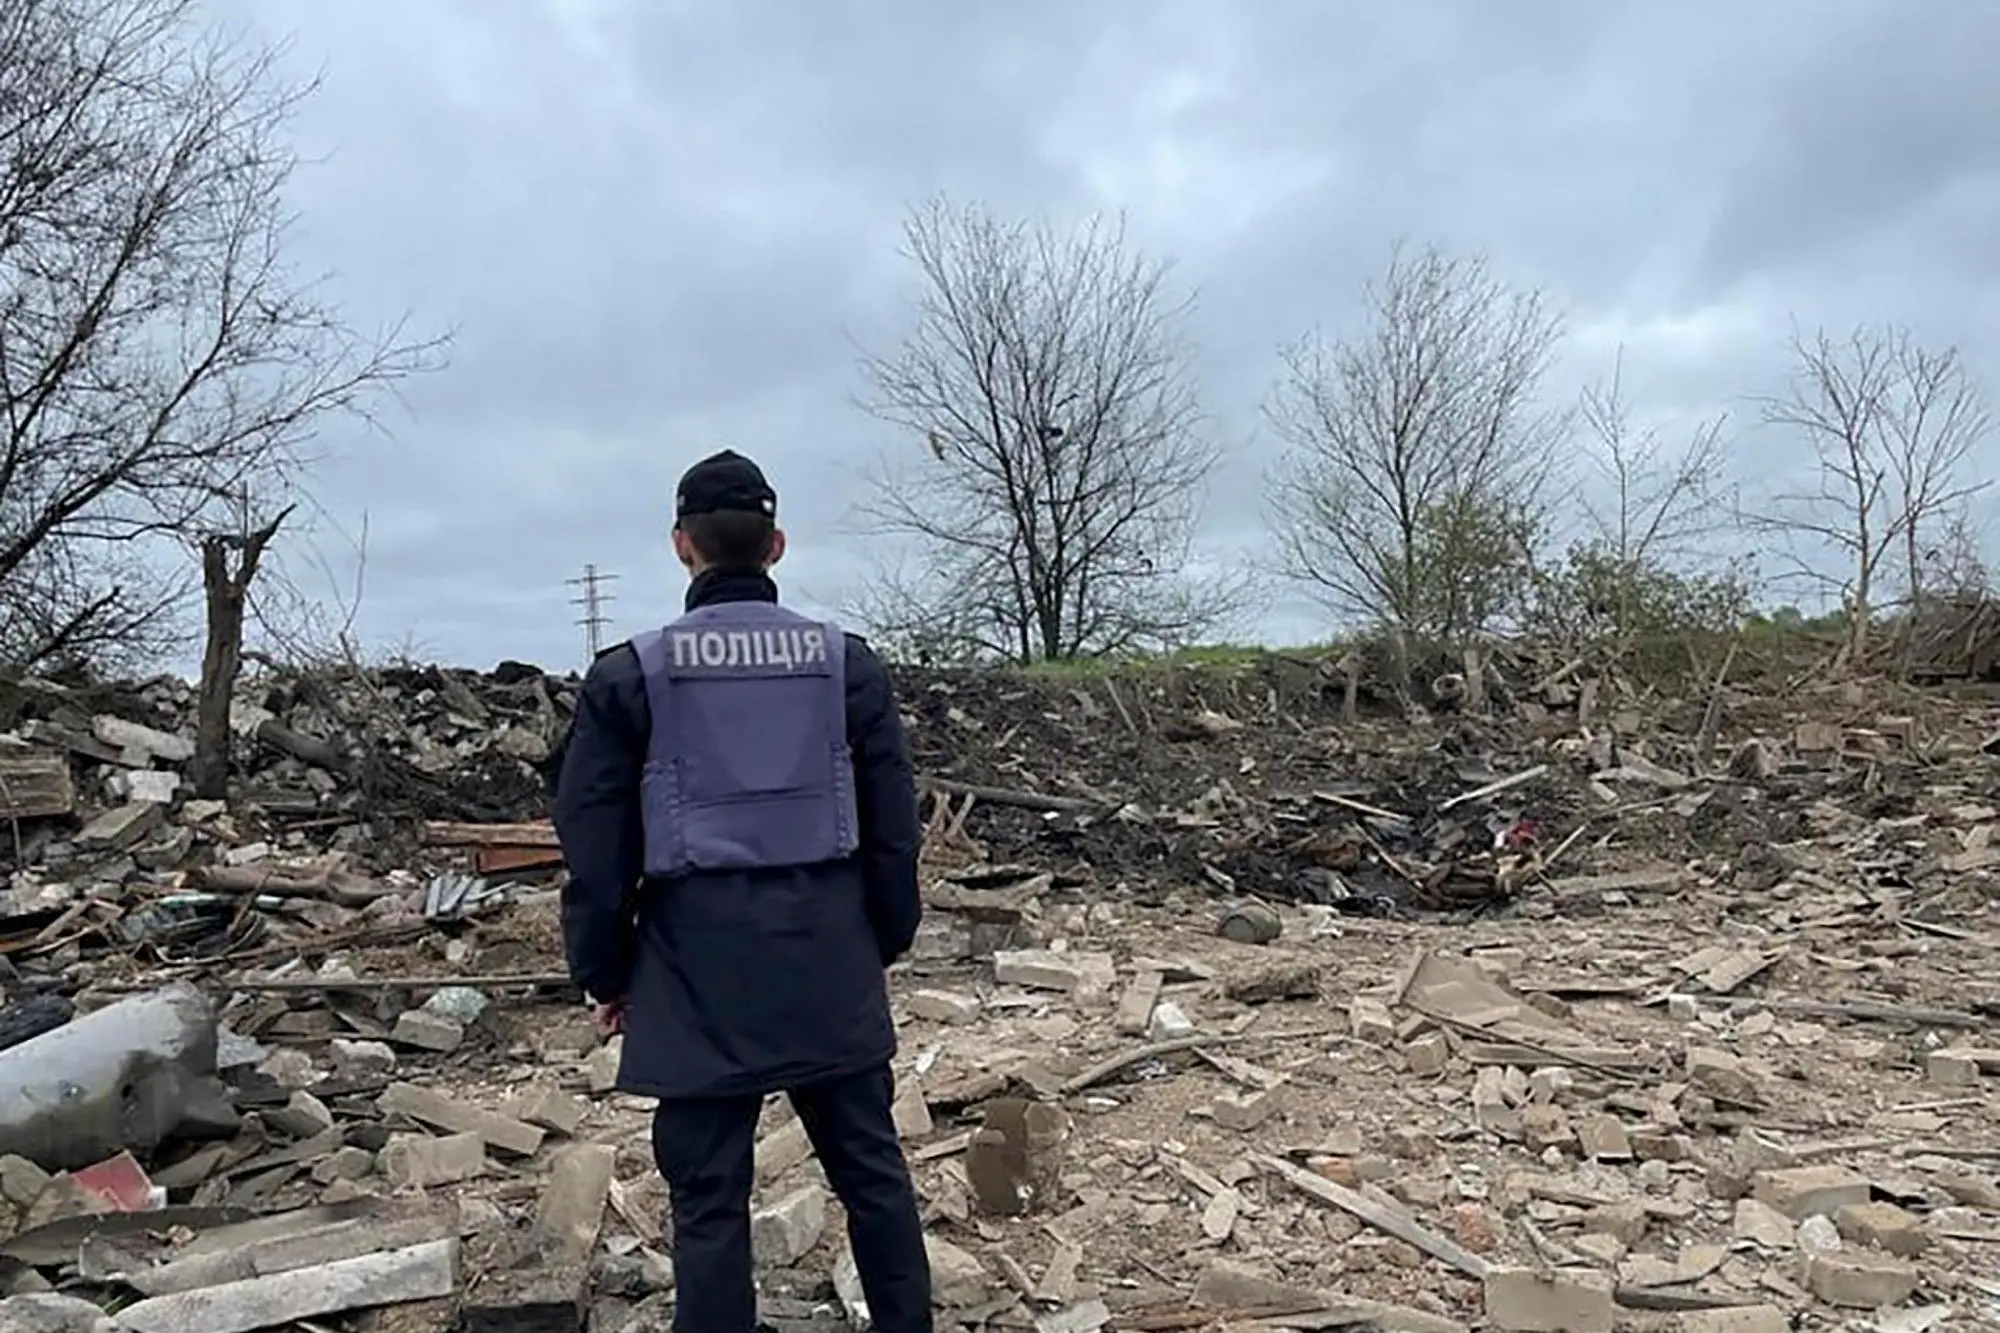 epa10602252 A handout photo made available by the National Police of Ukraine via telegram shows a police officer standing among debris at a site hit by shelling in Pavlohrad, Ukraine, 01 May 2023, amid Russia's invasion. At least 34 persons were injured, including five children, after a military strike hit a residential area in Pavlohrad, the head of the Dnipropetrovsk Regional Military Administration, Serhiy Lysak wrote on telegram. Russian troops entered Ukrainian territory on 24 February 2022, starting a conflict that has provoked destruction and a humanitarian crisis. One year on, fighting continues in many parts of the country. EPA/NATIONAL POLICE OF UKRAINE / HANDOUT -- BEST QUALITY AVAILABLE -- MANDATORY CREDIT HANDOUT EDITORIAL USE ONLY/NO SALES